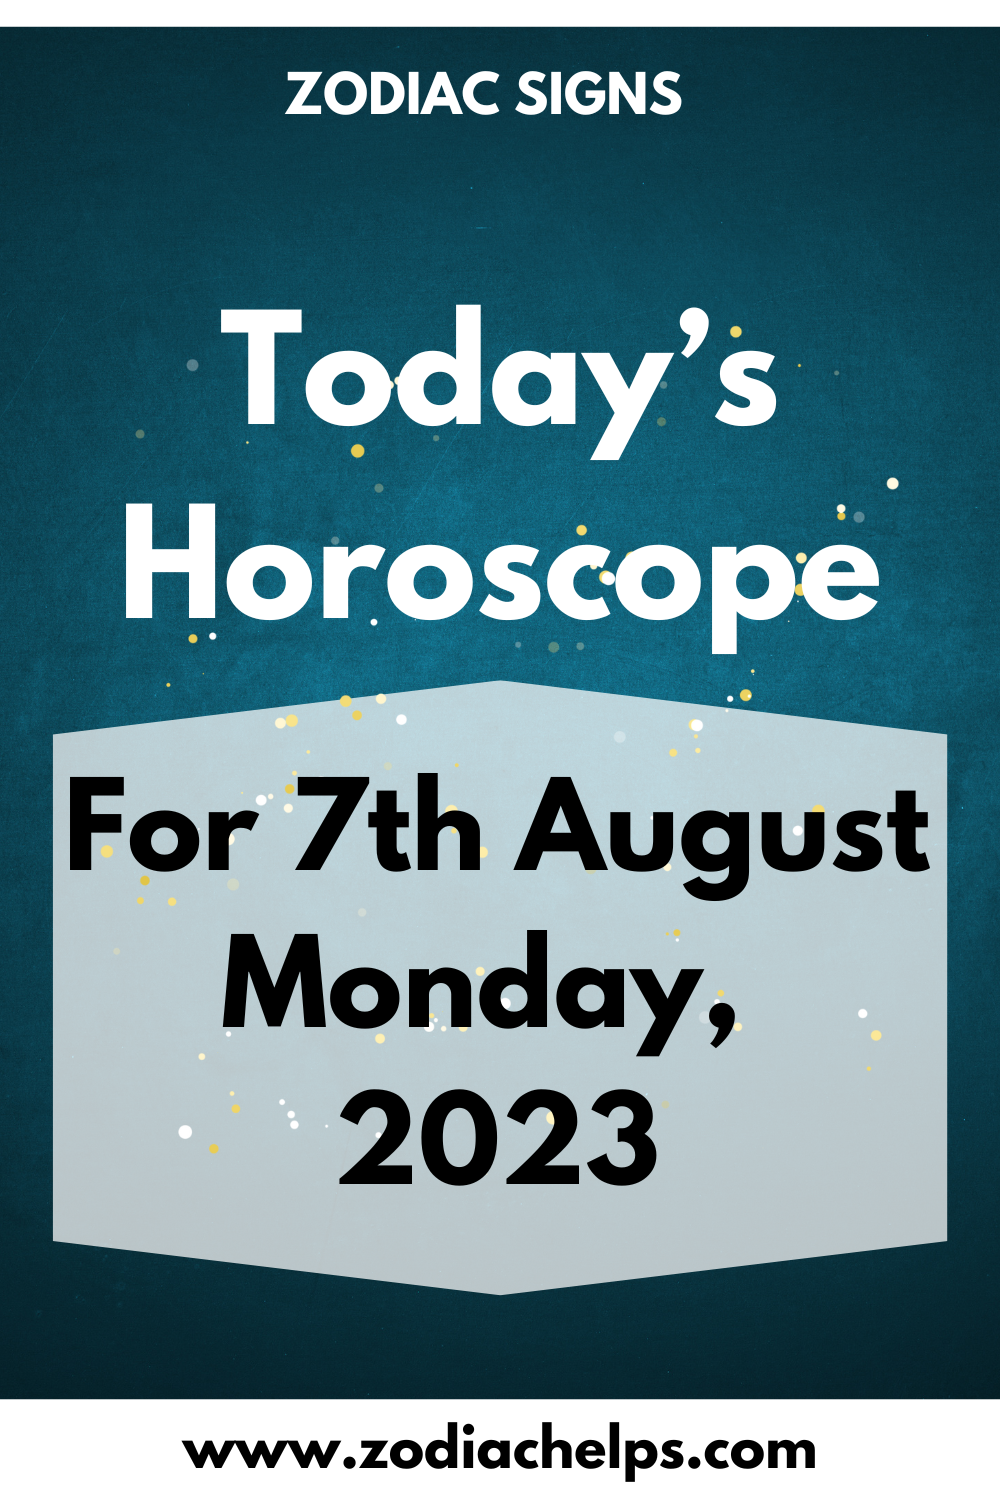 Today’s Horoscope for 7th August Monday, 2023